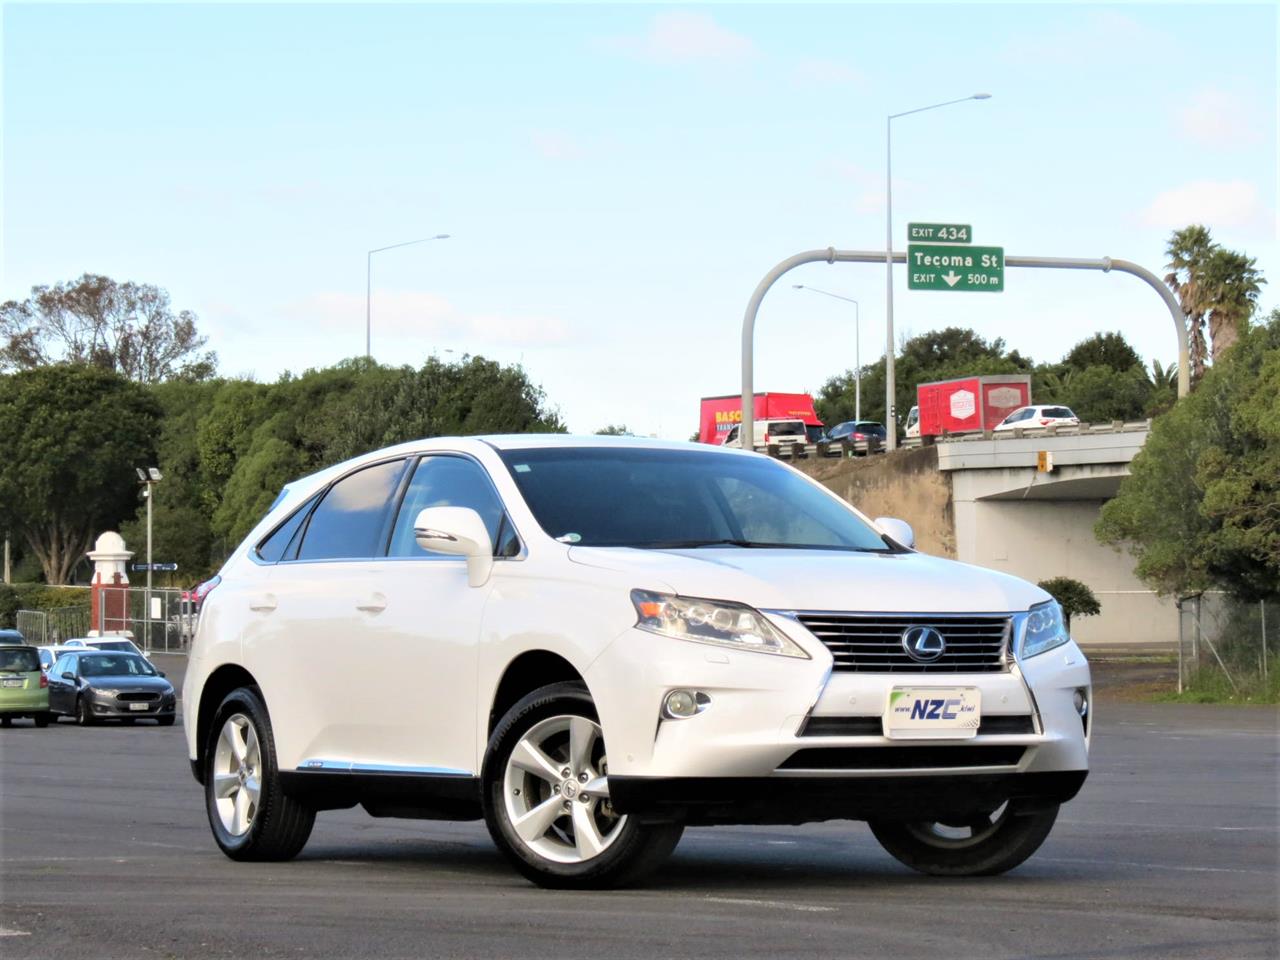 2012 Lexus RX 450H only $91 weekly